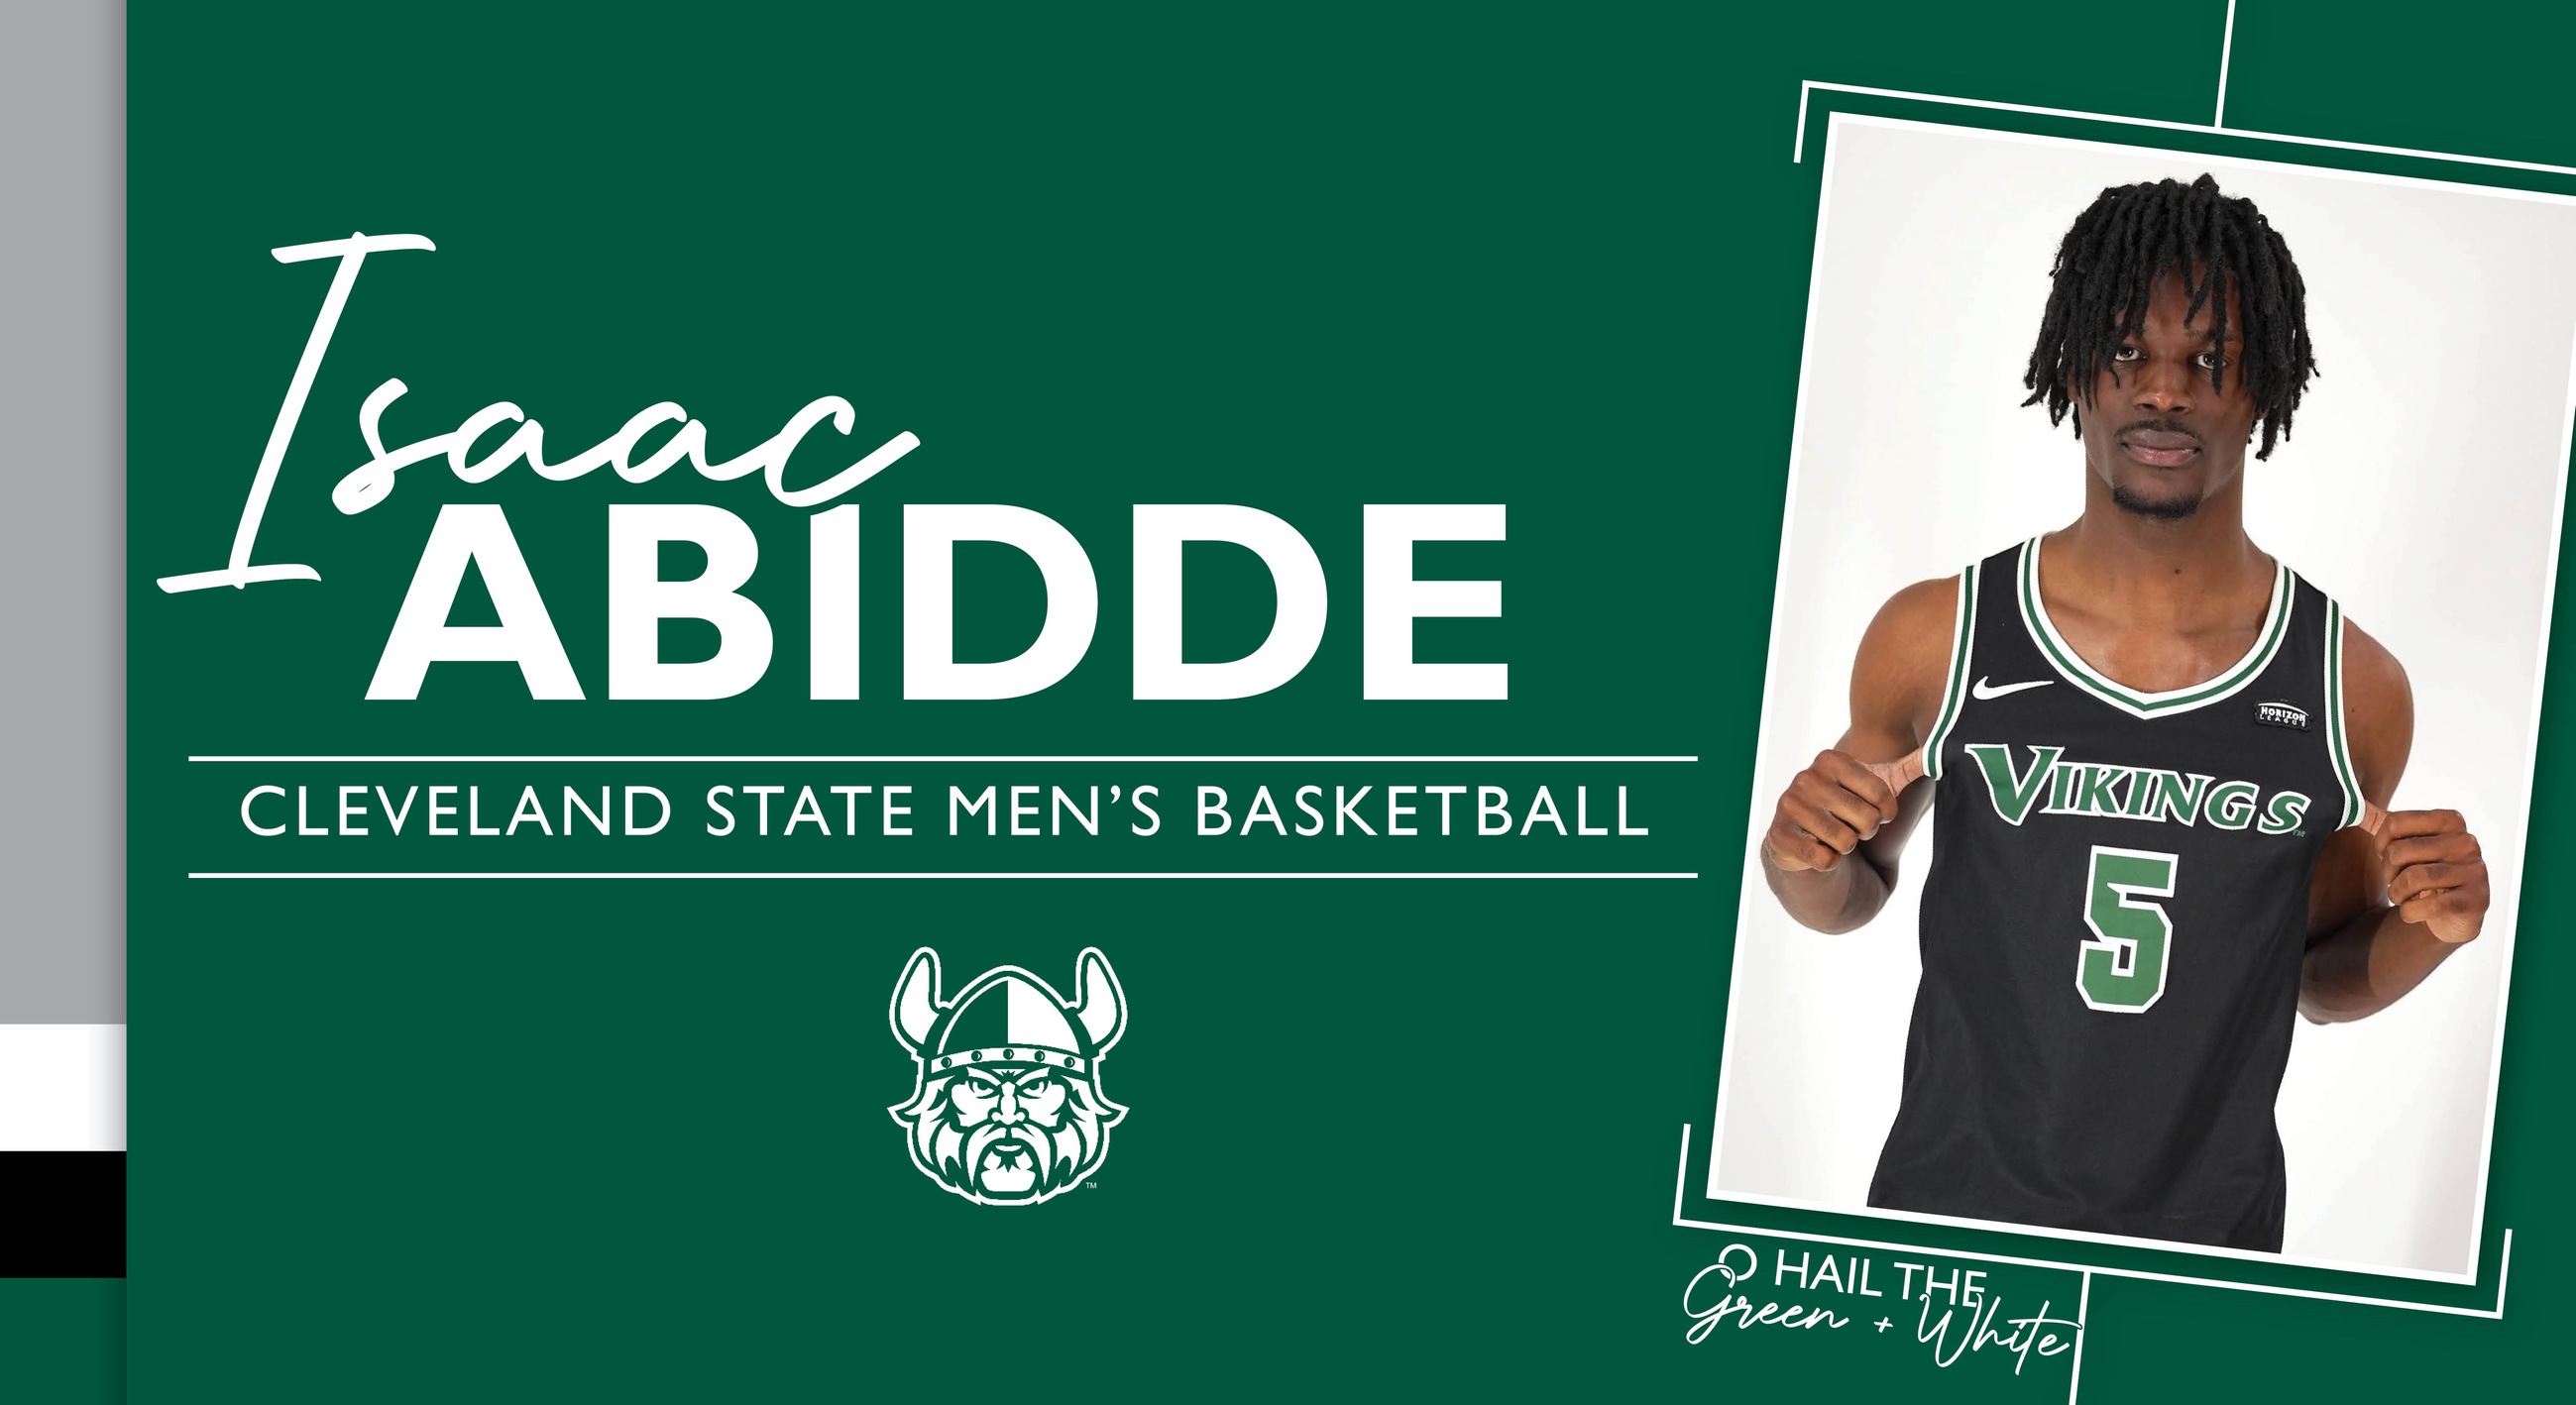 Cleveland State Men&rsquo;s Basketball Signs Isaac Abidde to Letter of Intent